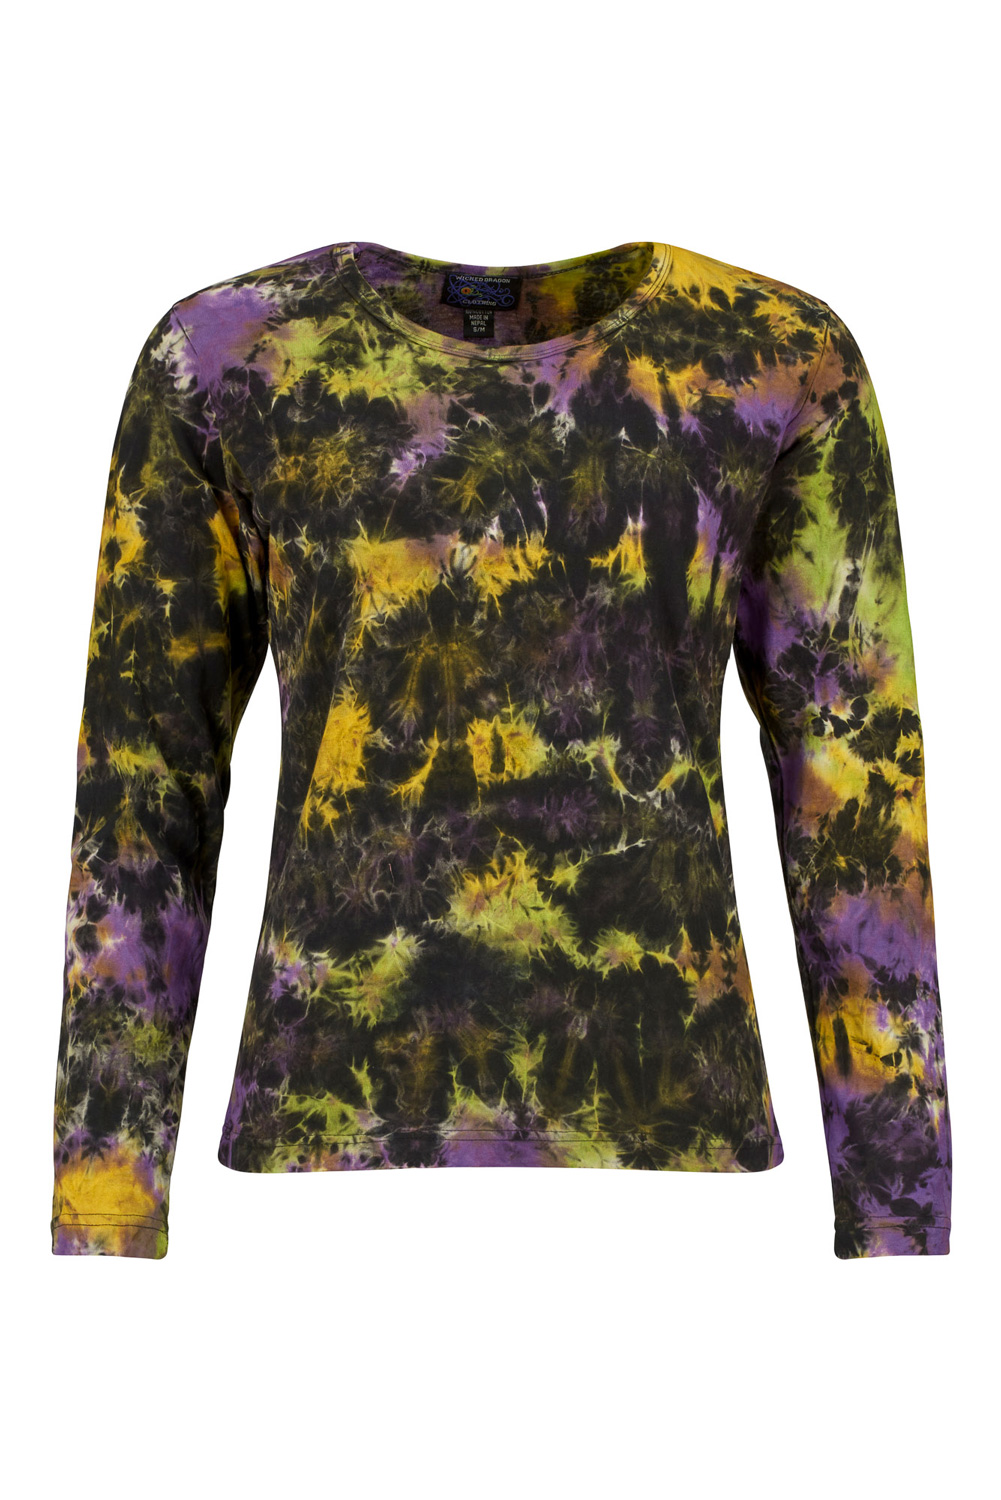 Wicked Dragon Clothing - Tie dye long sleeve hippe top